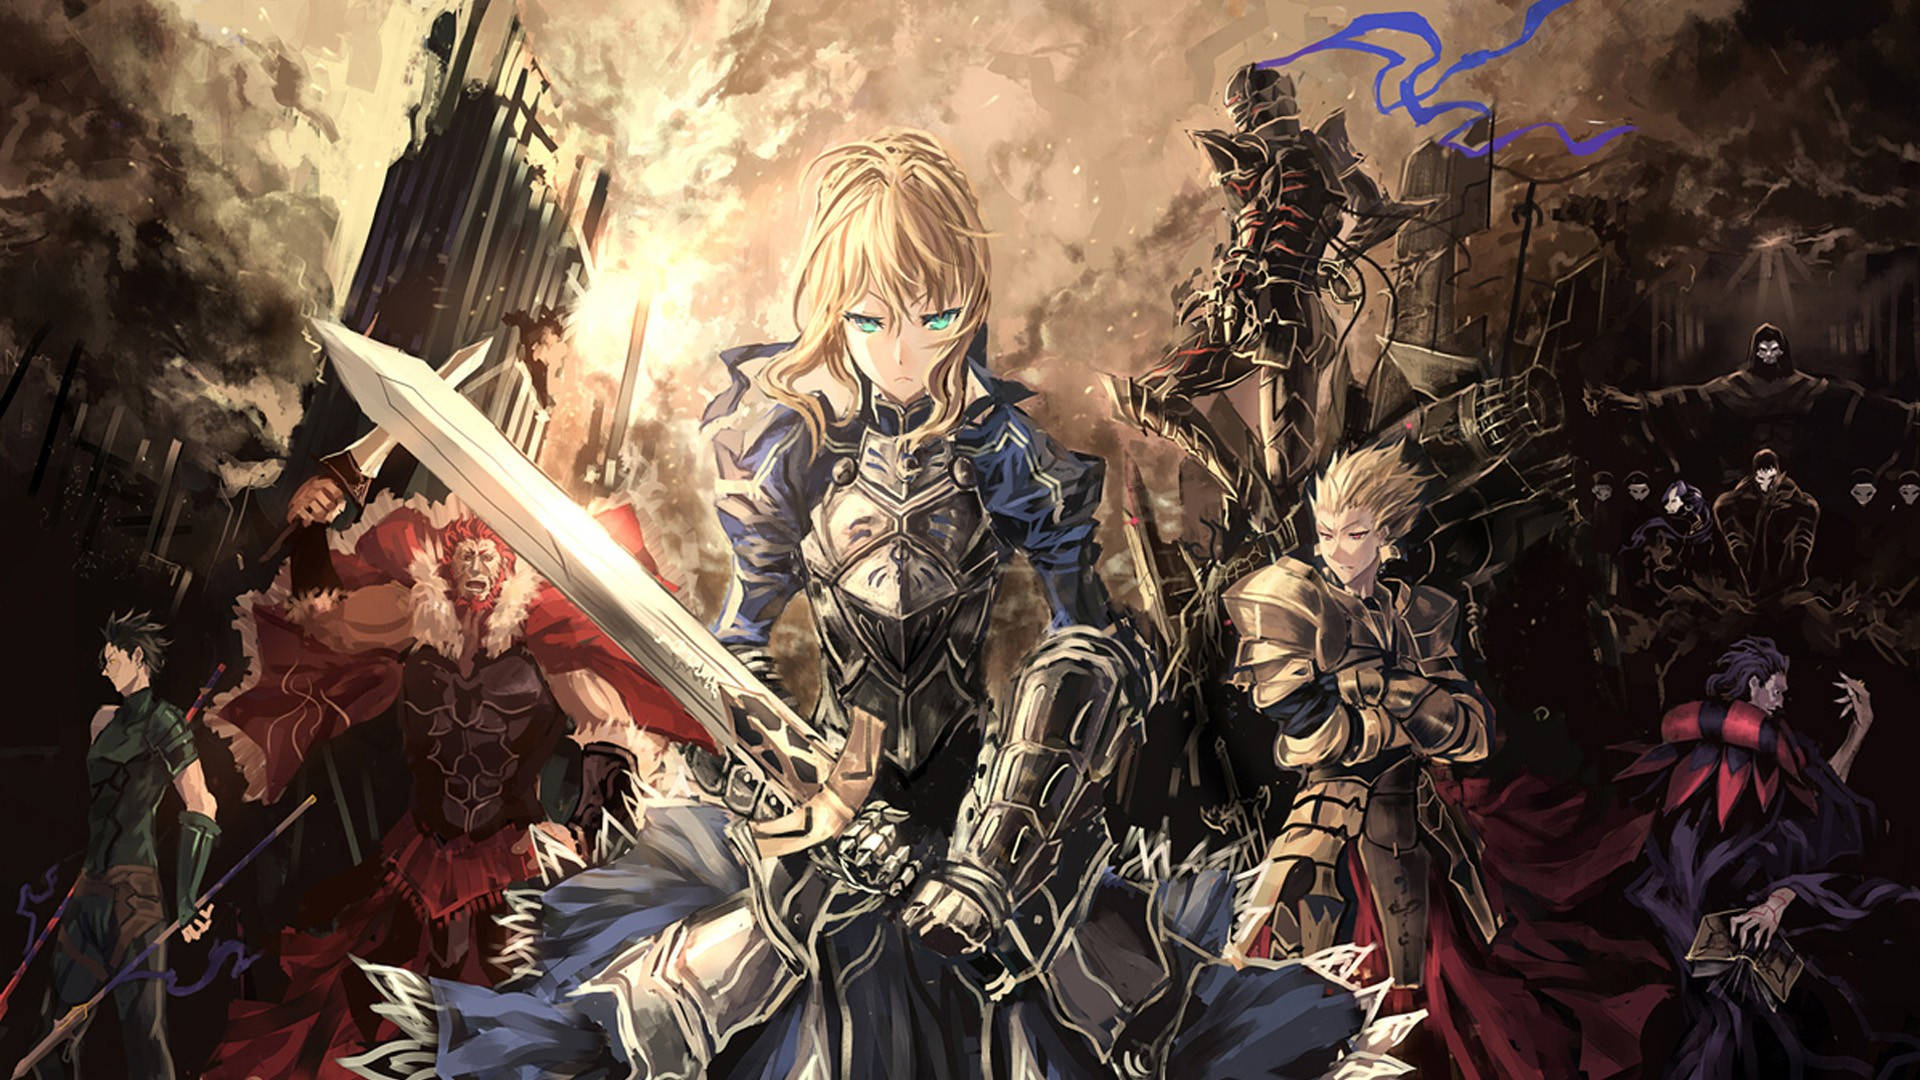 "Saving the world is a difficult task but with the magical knights of Fate Zero, victory becomes an achievable goal." Wallpaper